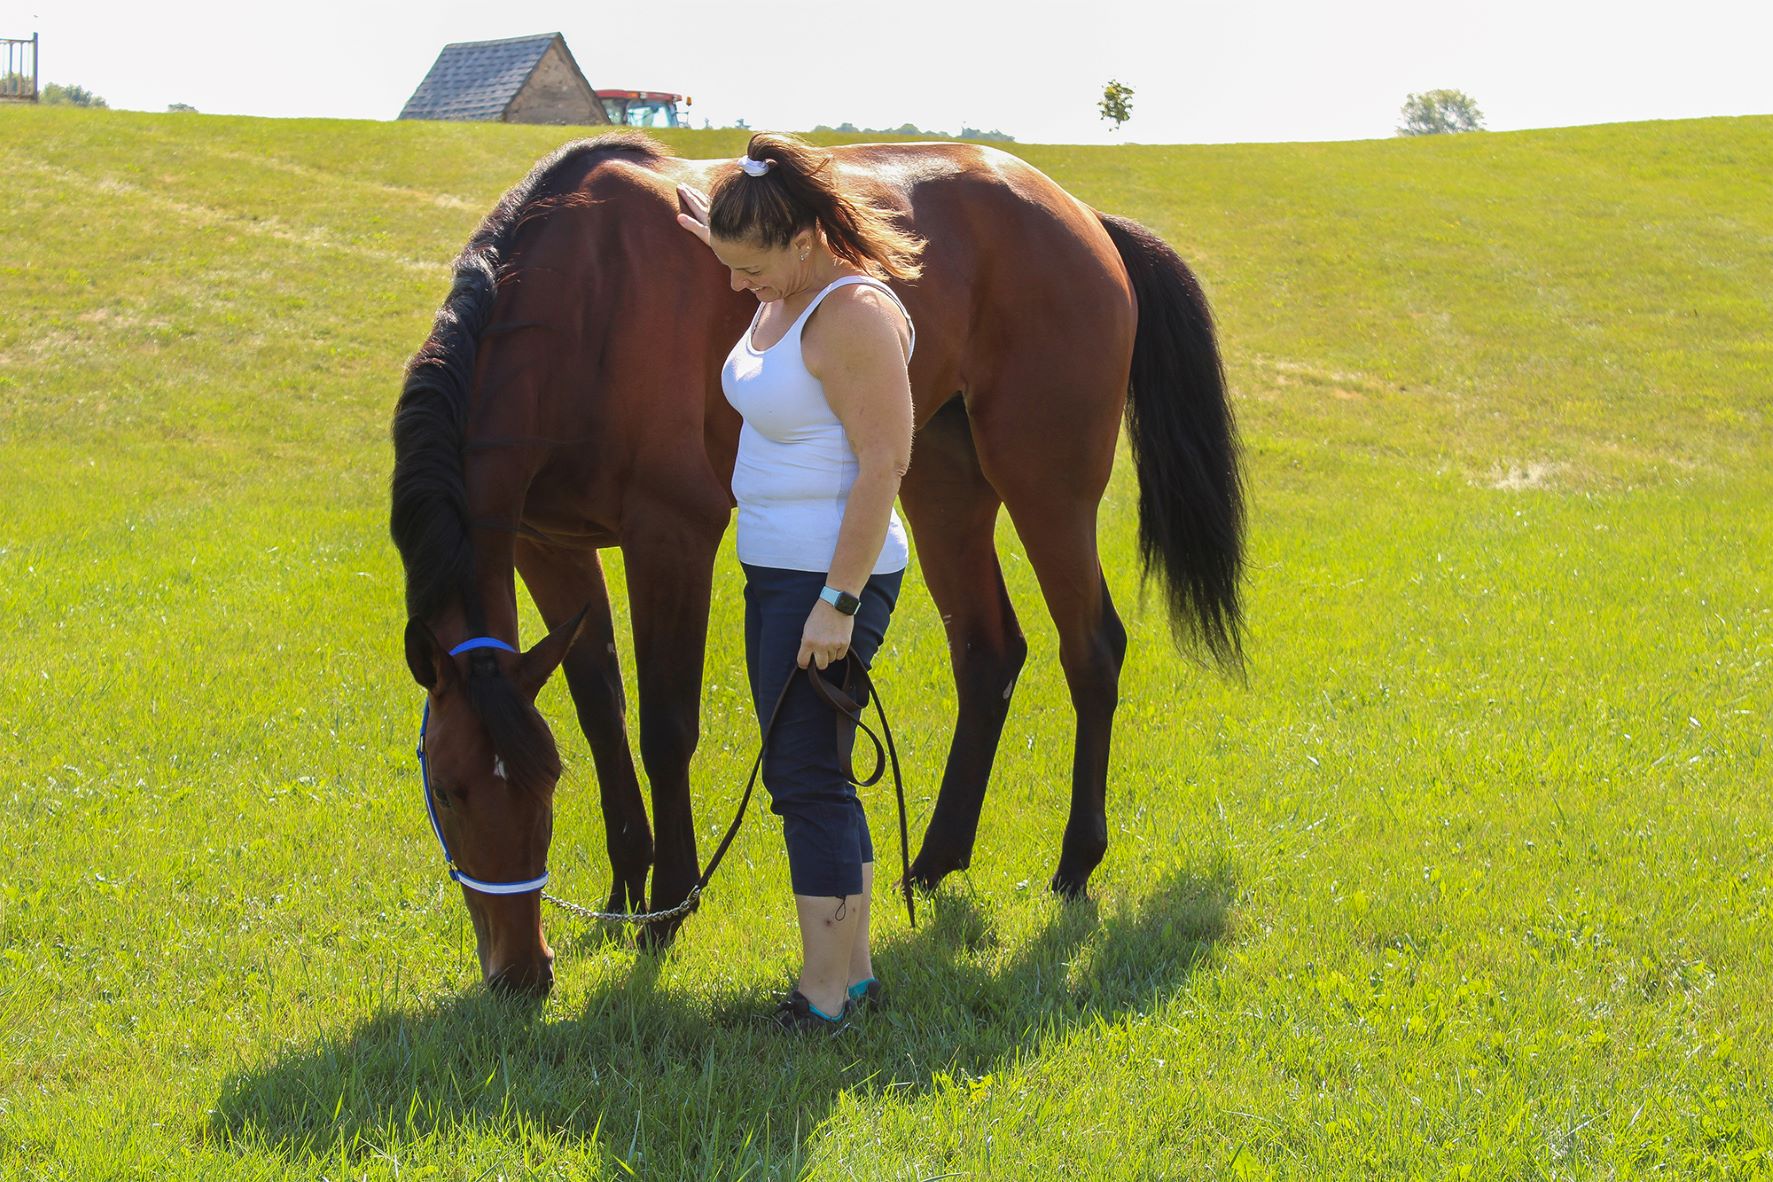 Year in Review: Reset and Refreshed Thanks to the Power of Family and Horses